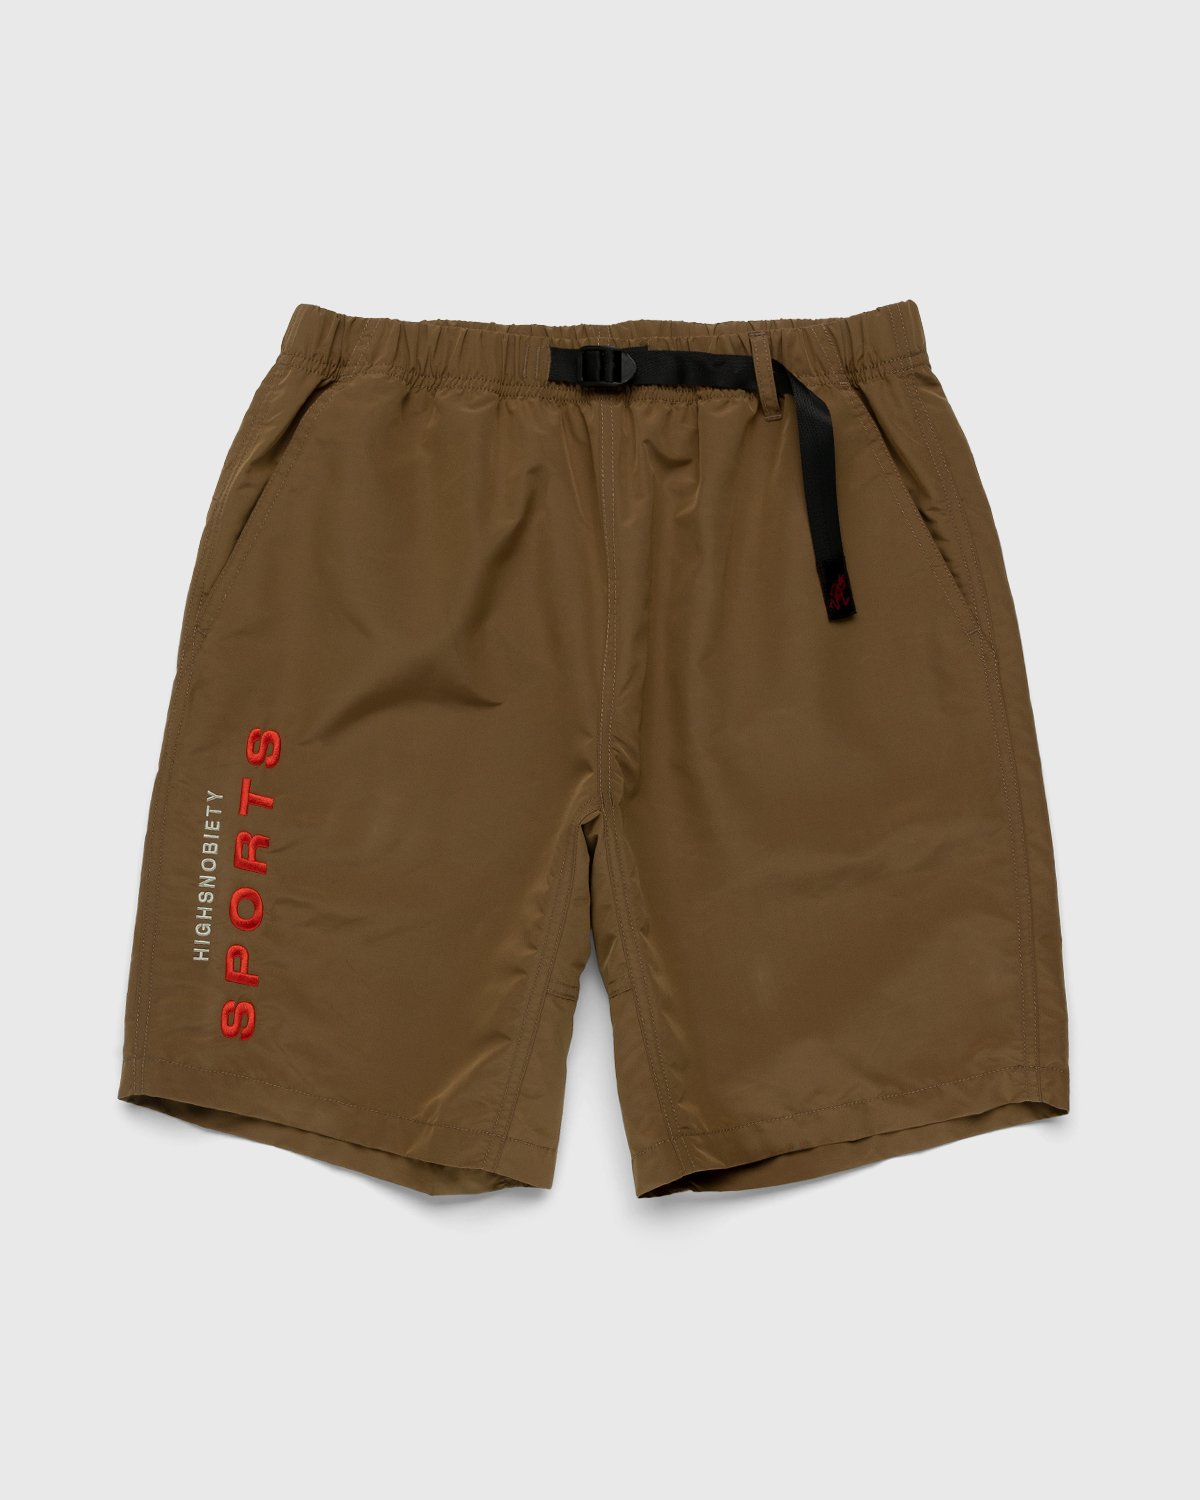 Gramicci x Highsnobiety - HS Sports Shell Packable Shorts Tan - Clothing - Brown - Image 1